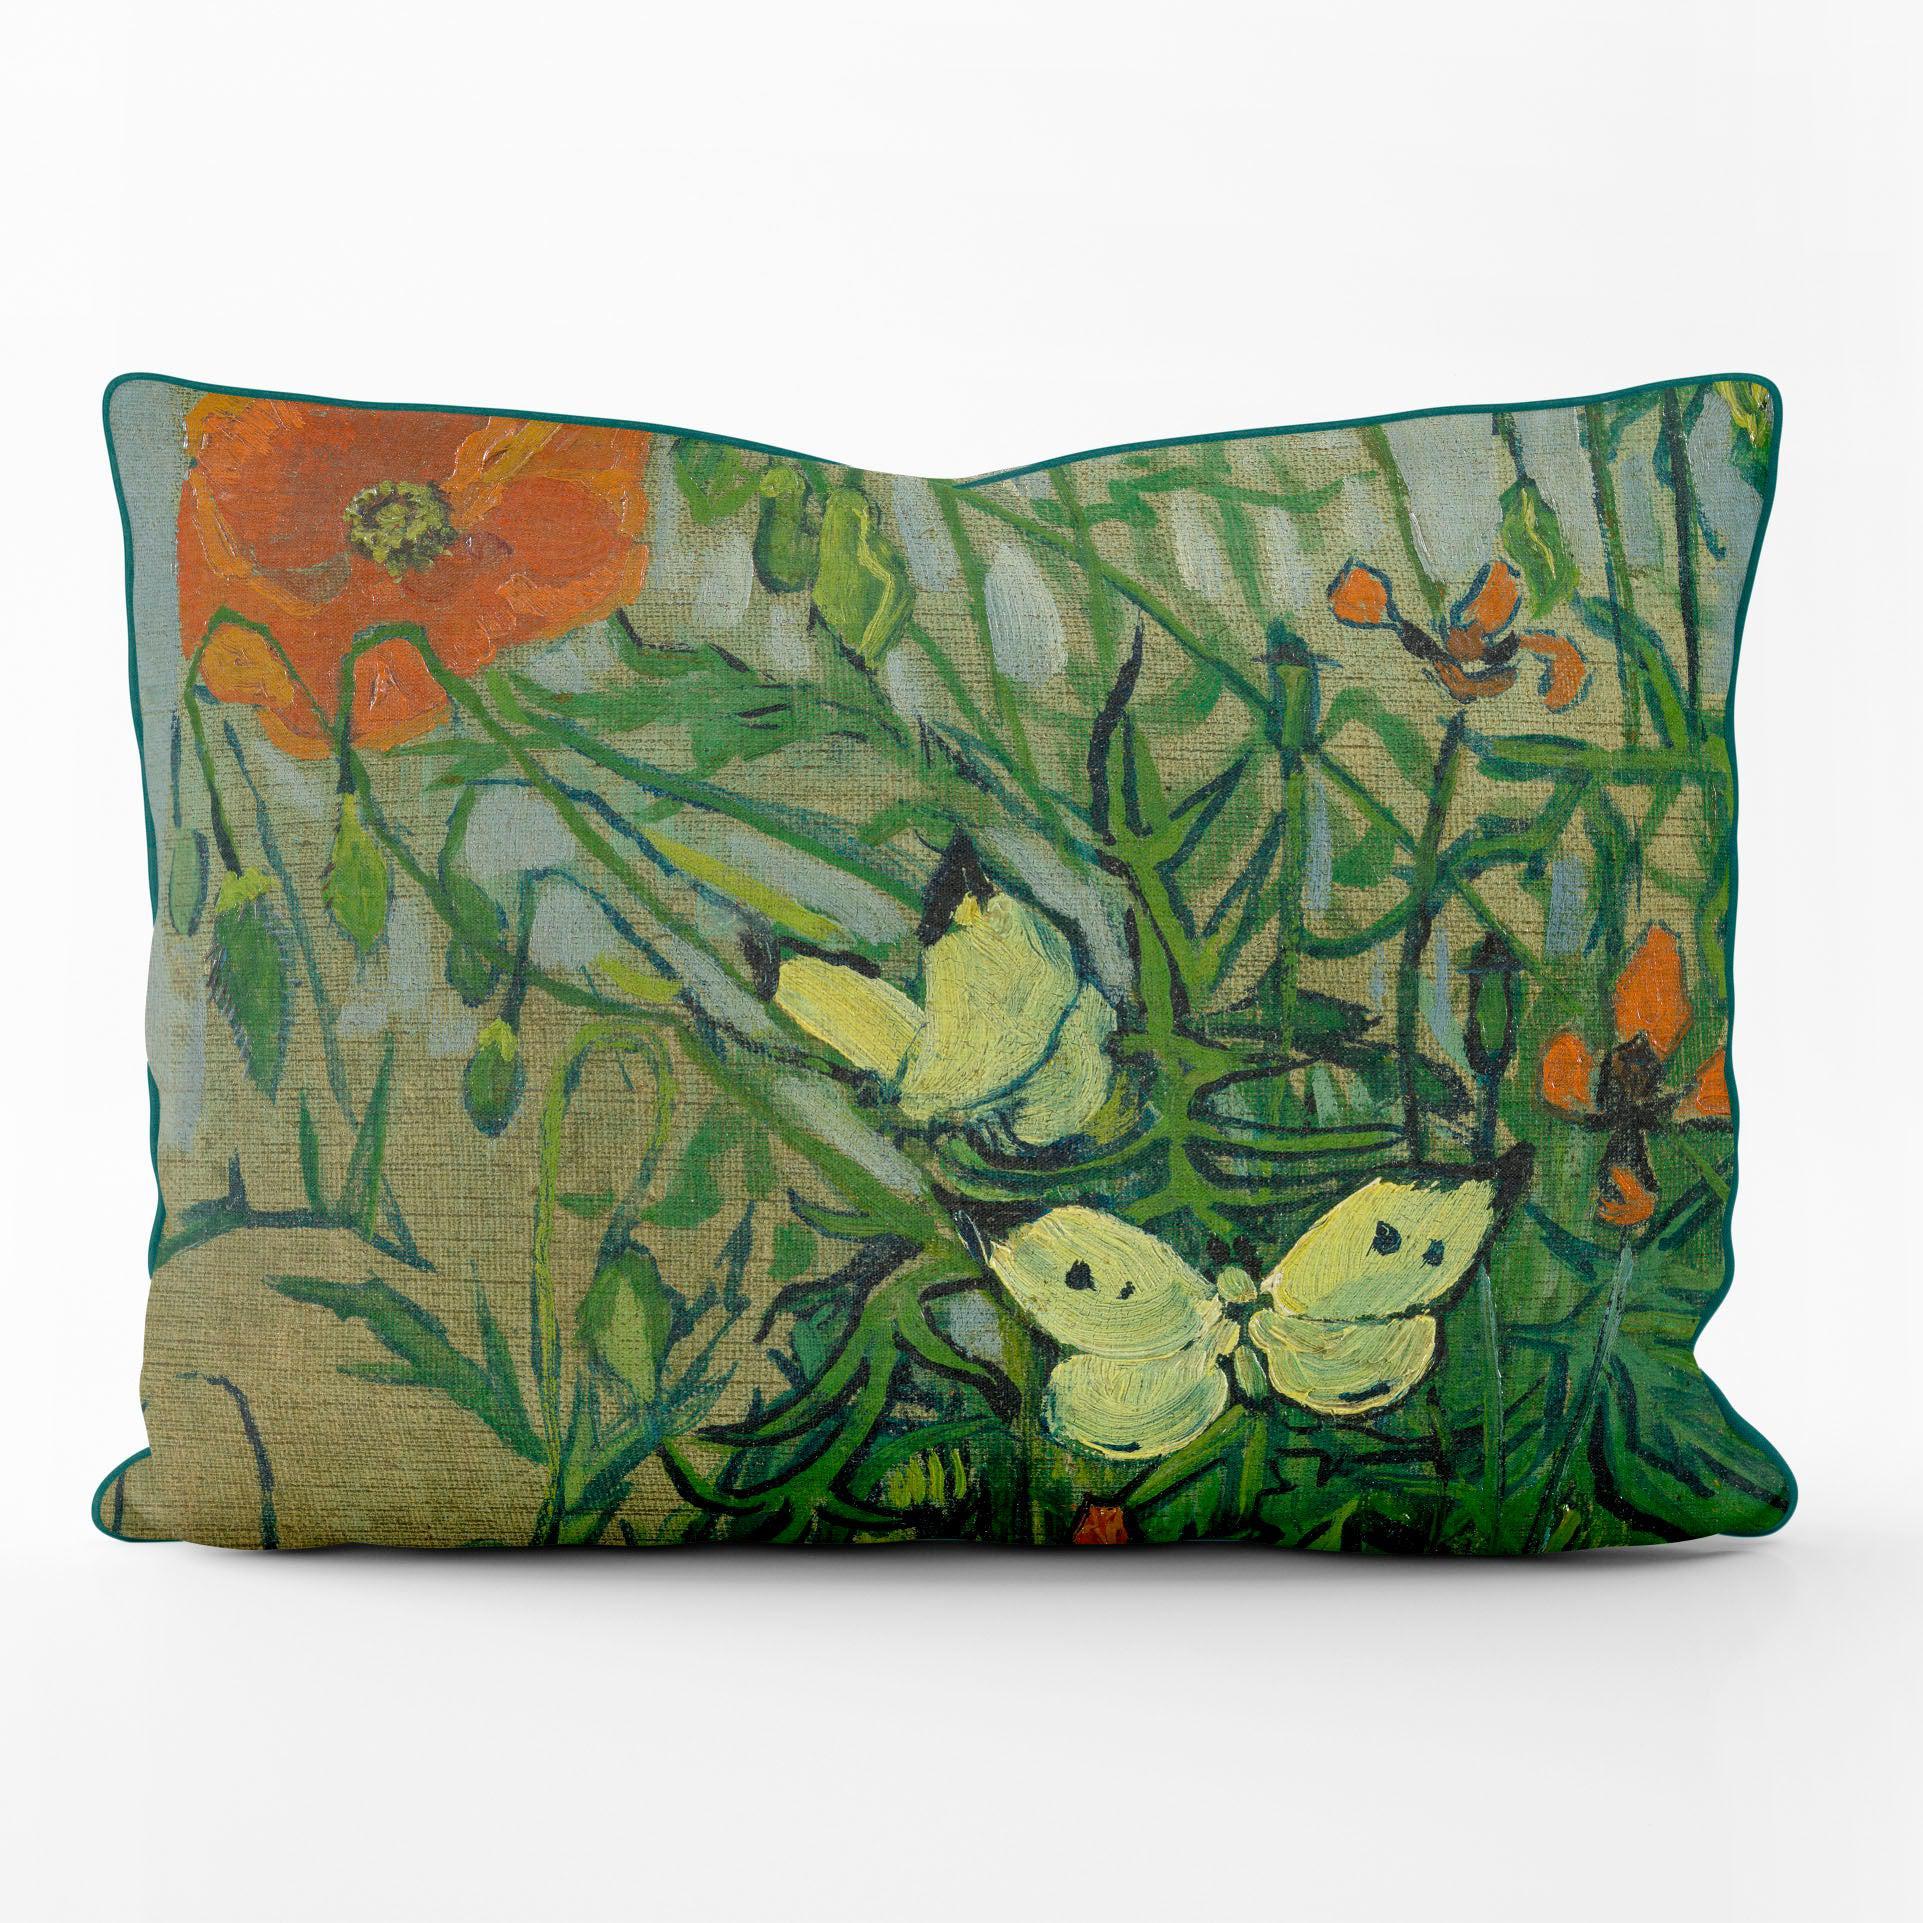 Poppies and Butterflies - Van Gogh Museum Cushion